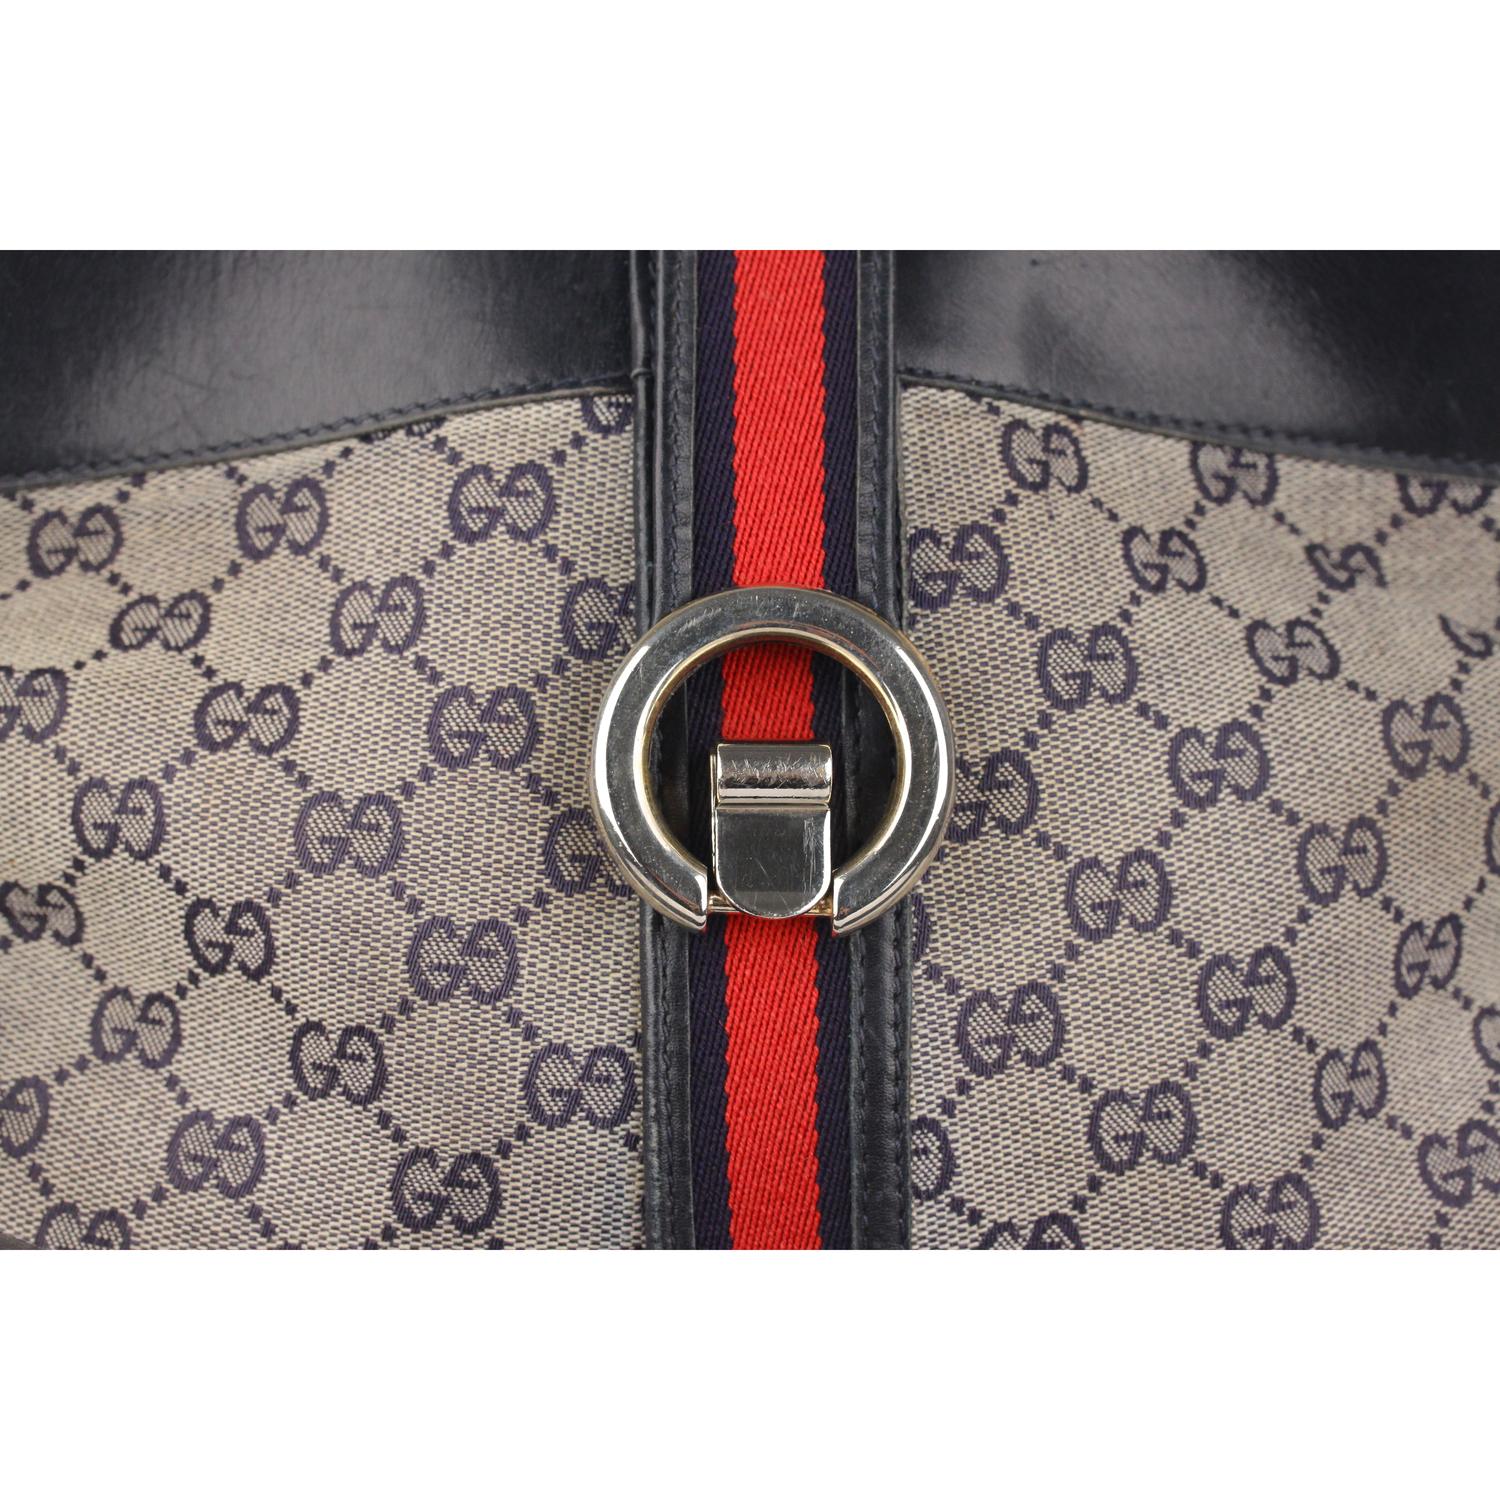 - Blue monogram canvas with genuine leather trim
- Blue/Red/Blue stripes detail
- Fold over strap with clasp closure
- Gold metal and silver metal hardware
- Blue diamond  lining 
- 1 zip pocket inside
- 'Made in Italy by GUCCI - Brevettato'